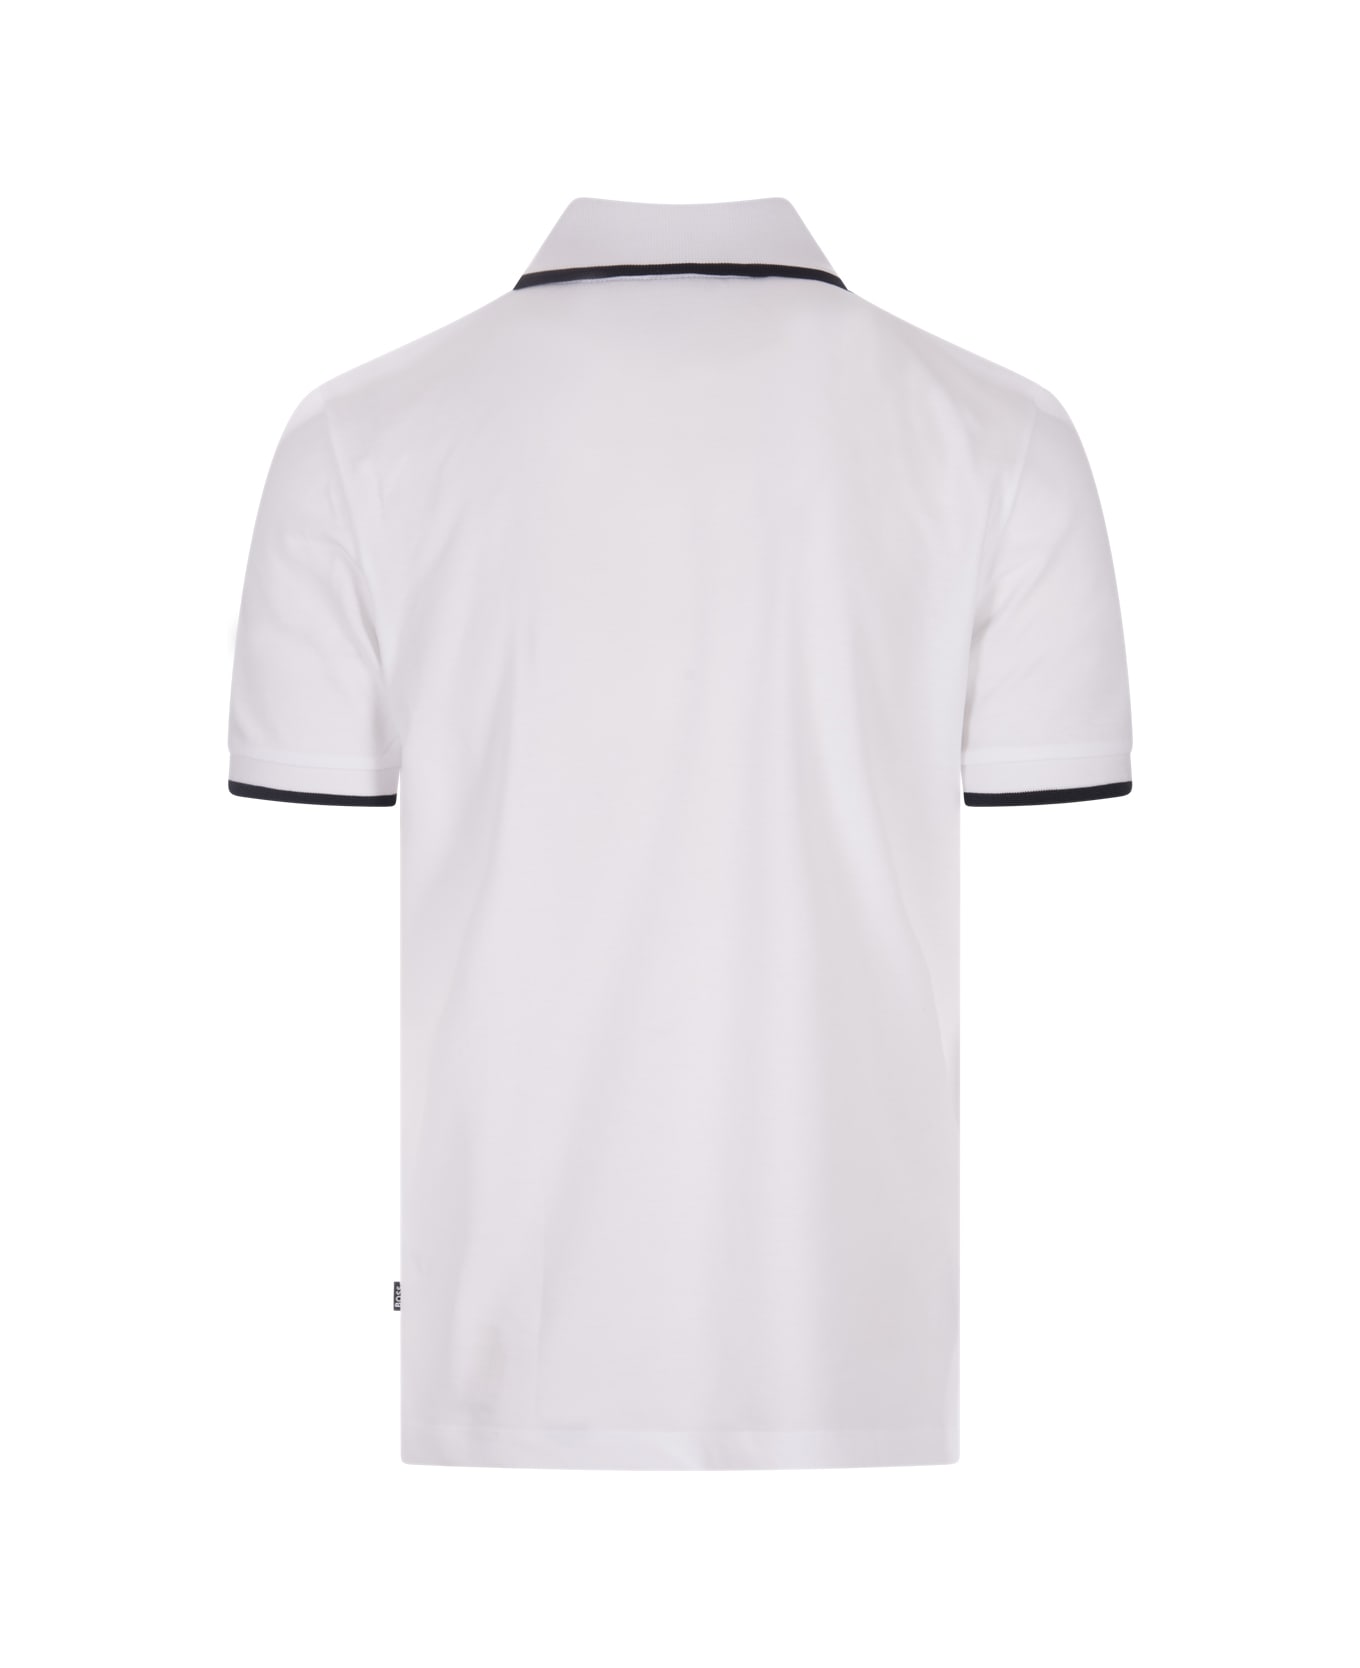 Hugo Boss White Slim Fit Polo Shirt With Striped Collar - White